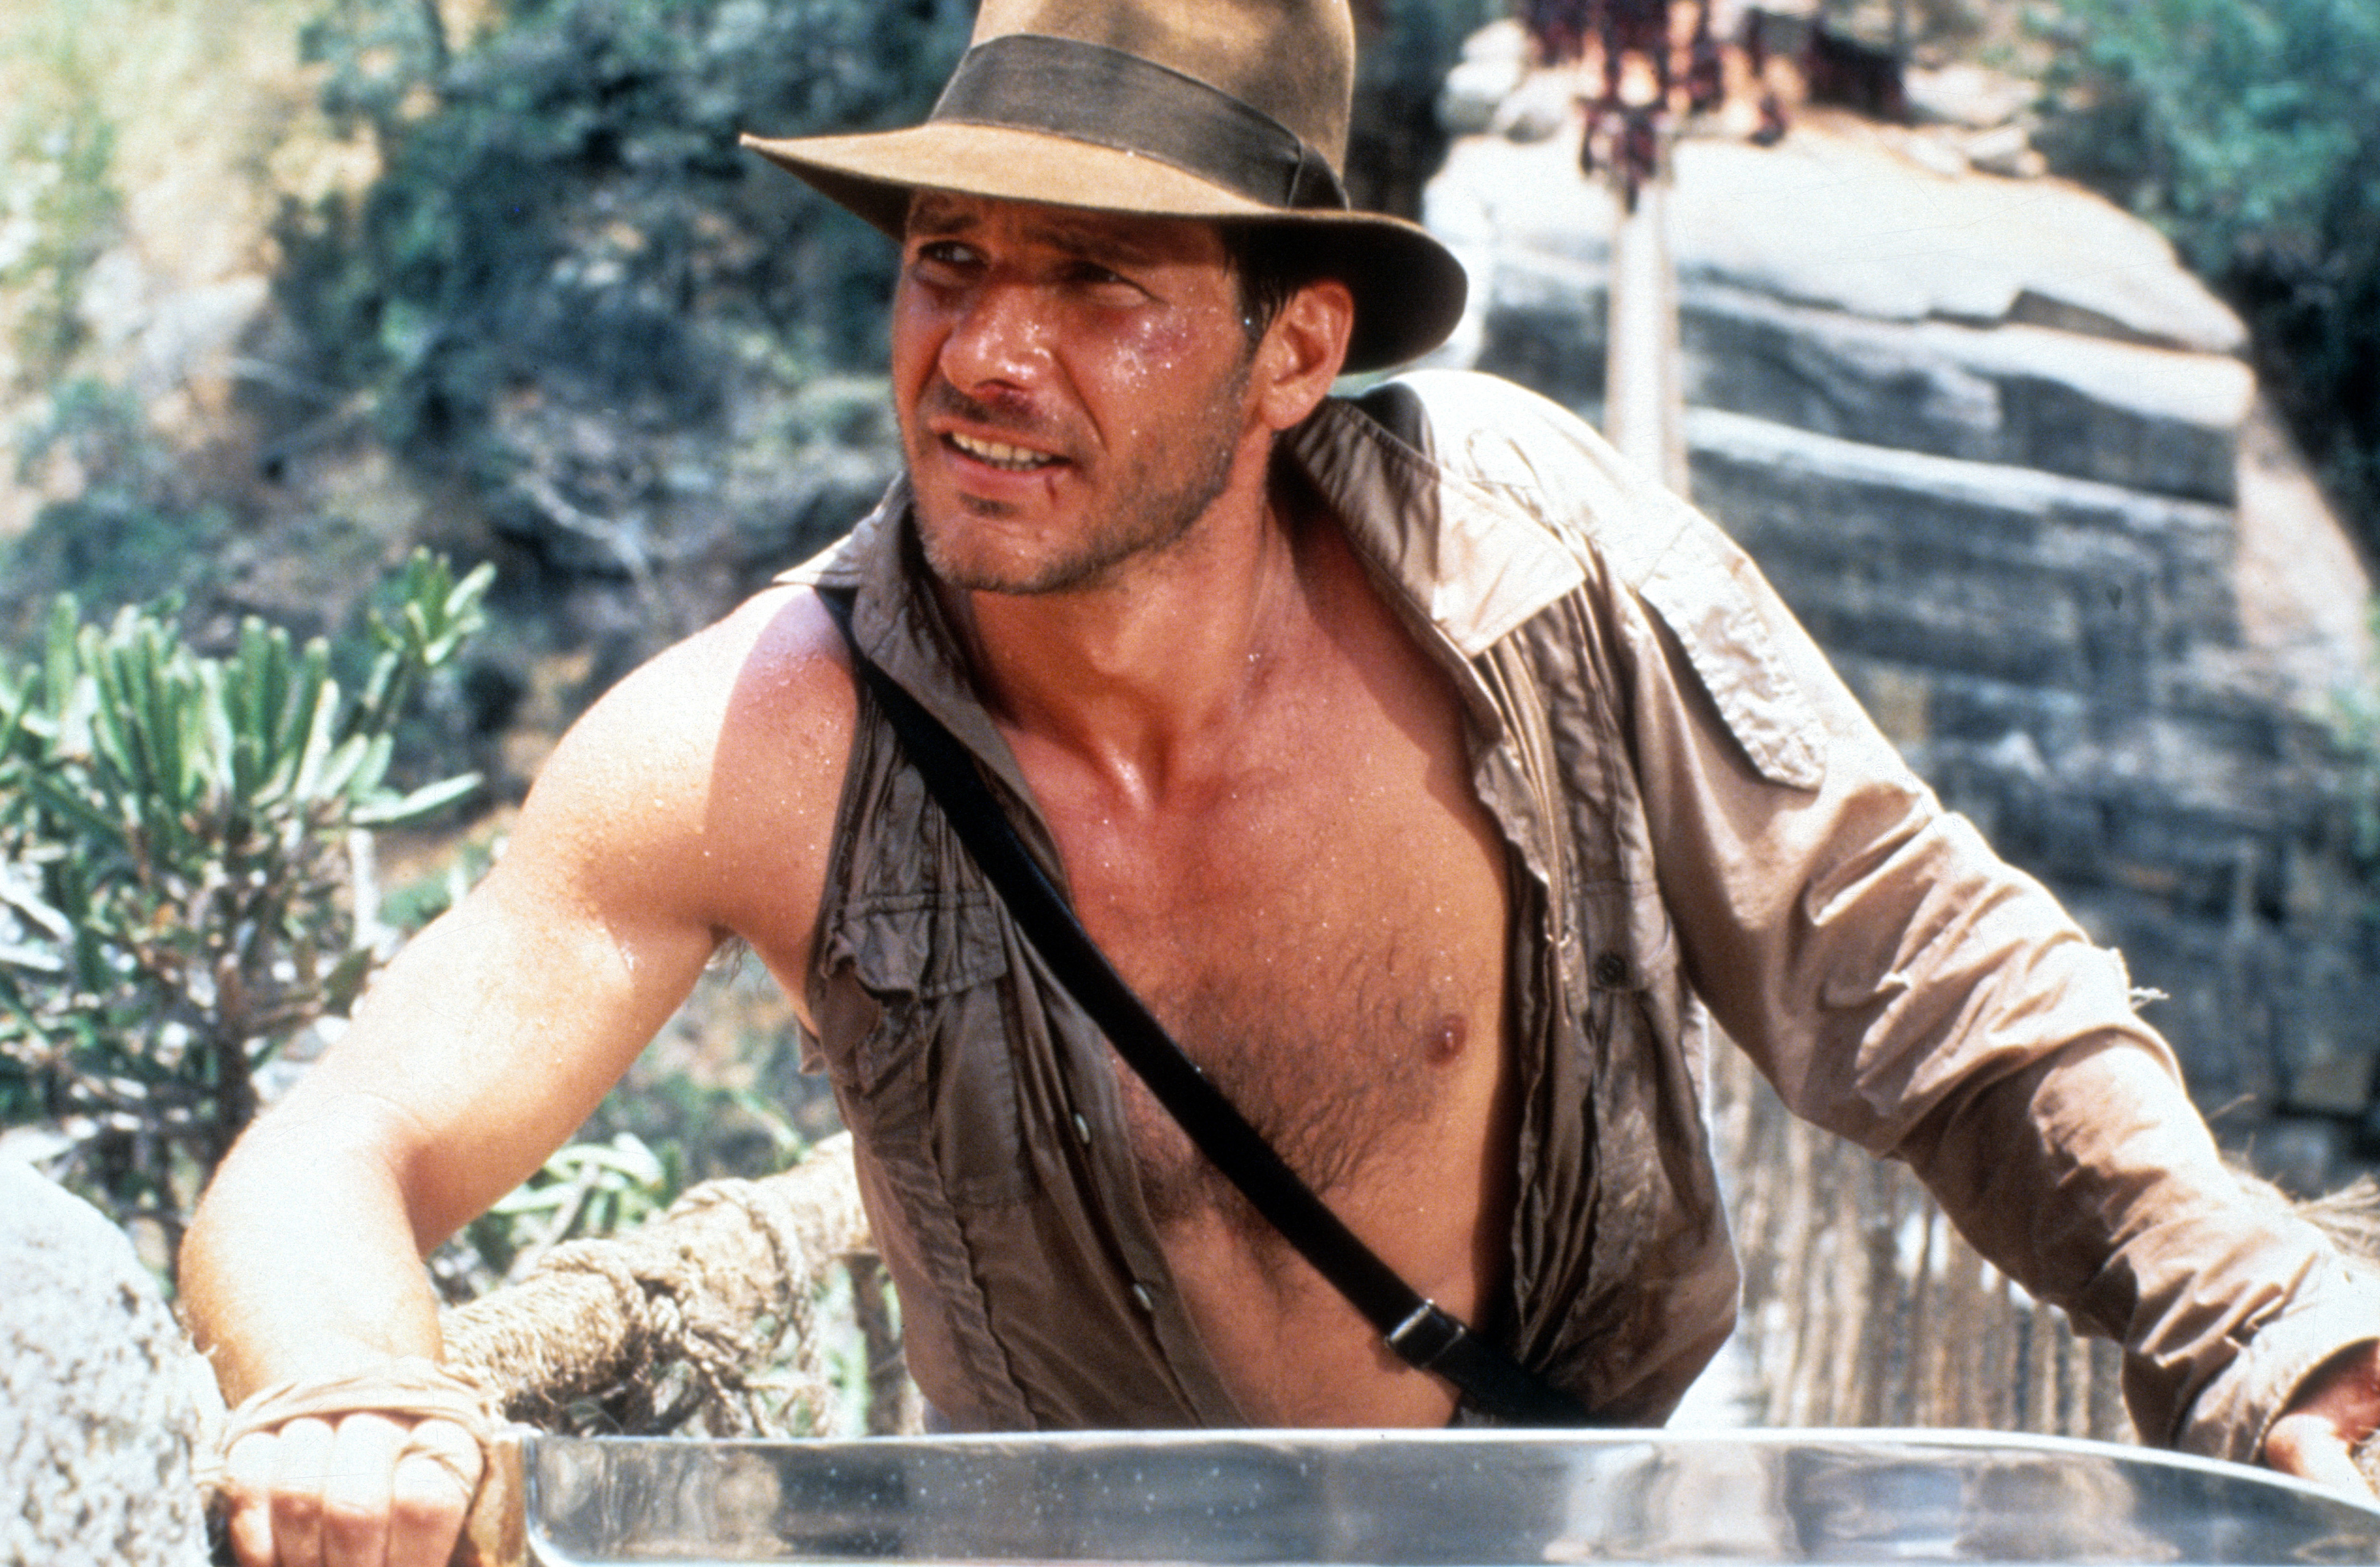 Harrison Ford in a scene from the film “Indiana Jones and the Temple of Doom” in 1984 | Source: Getty Images